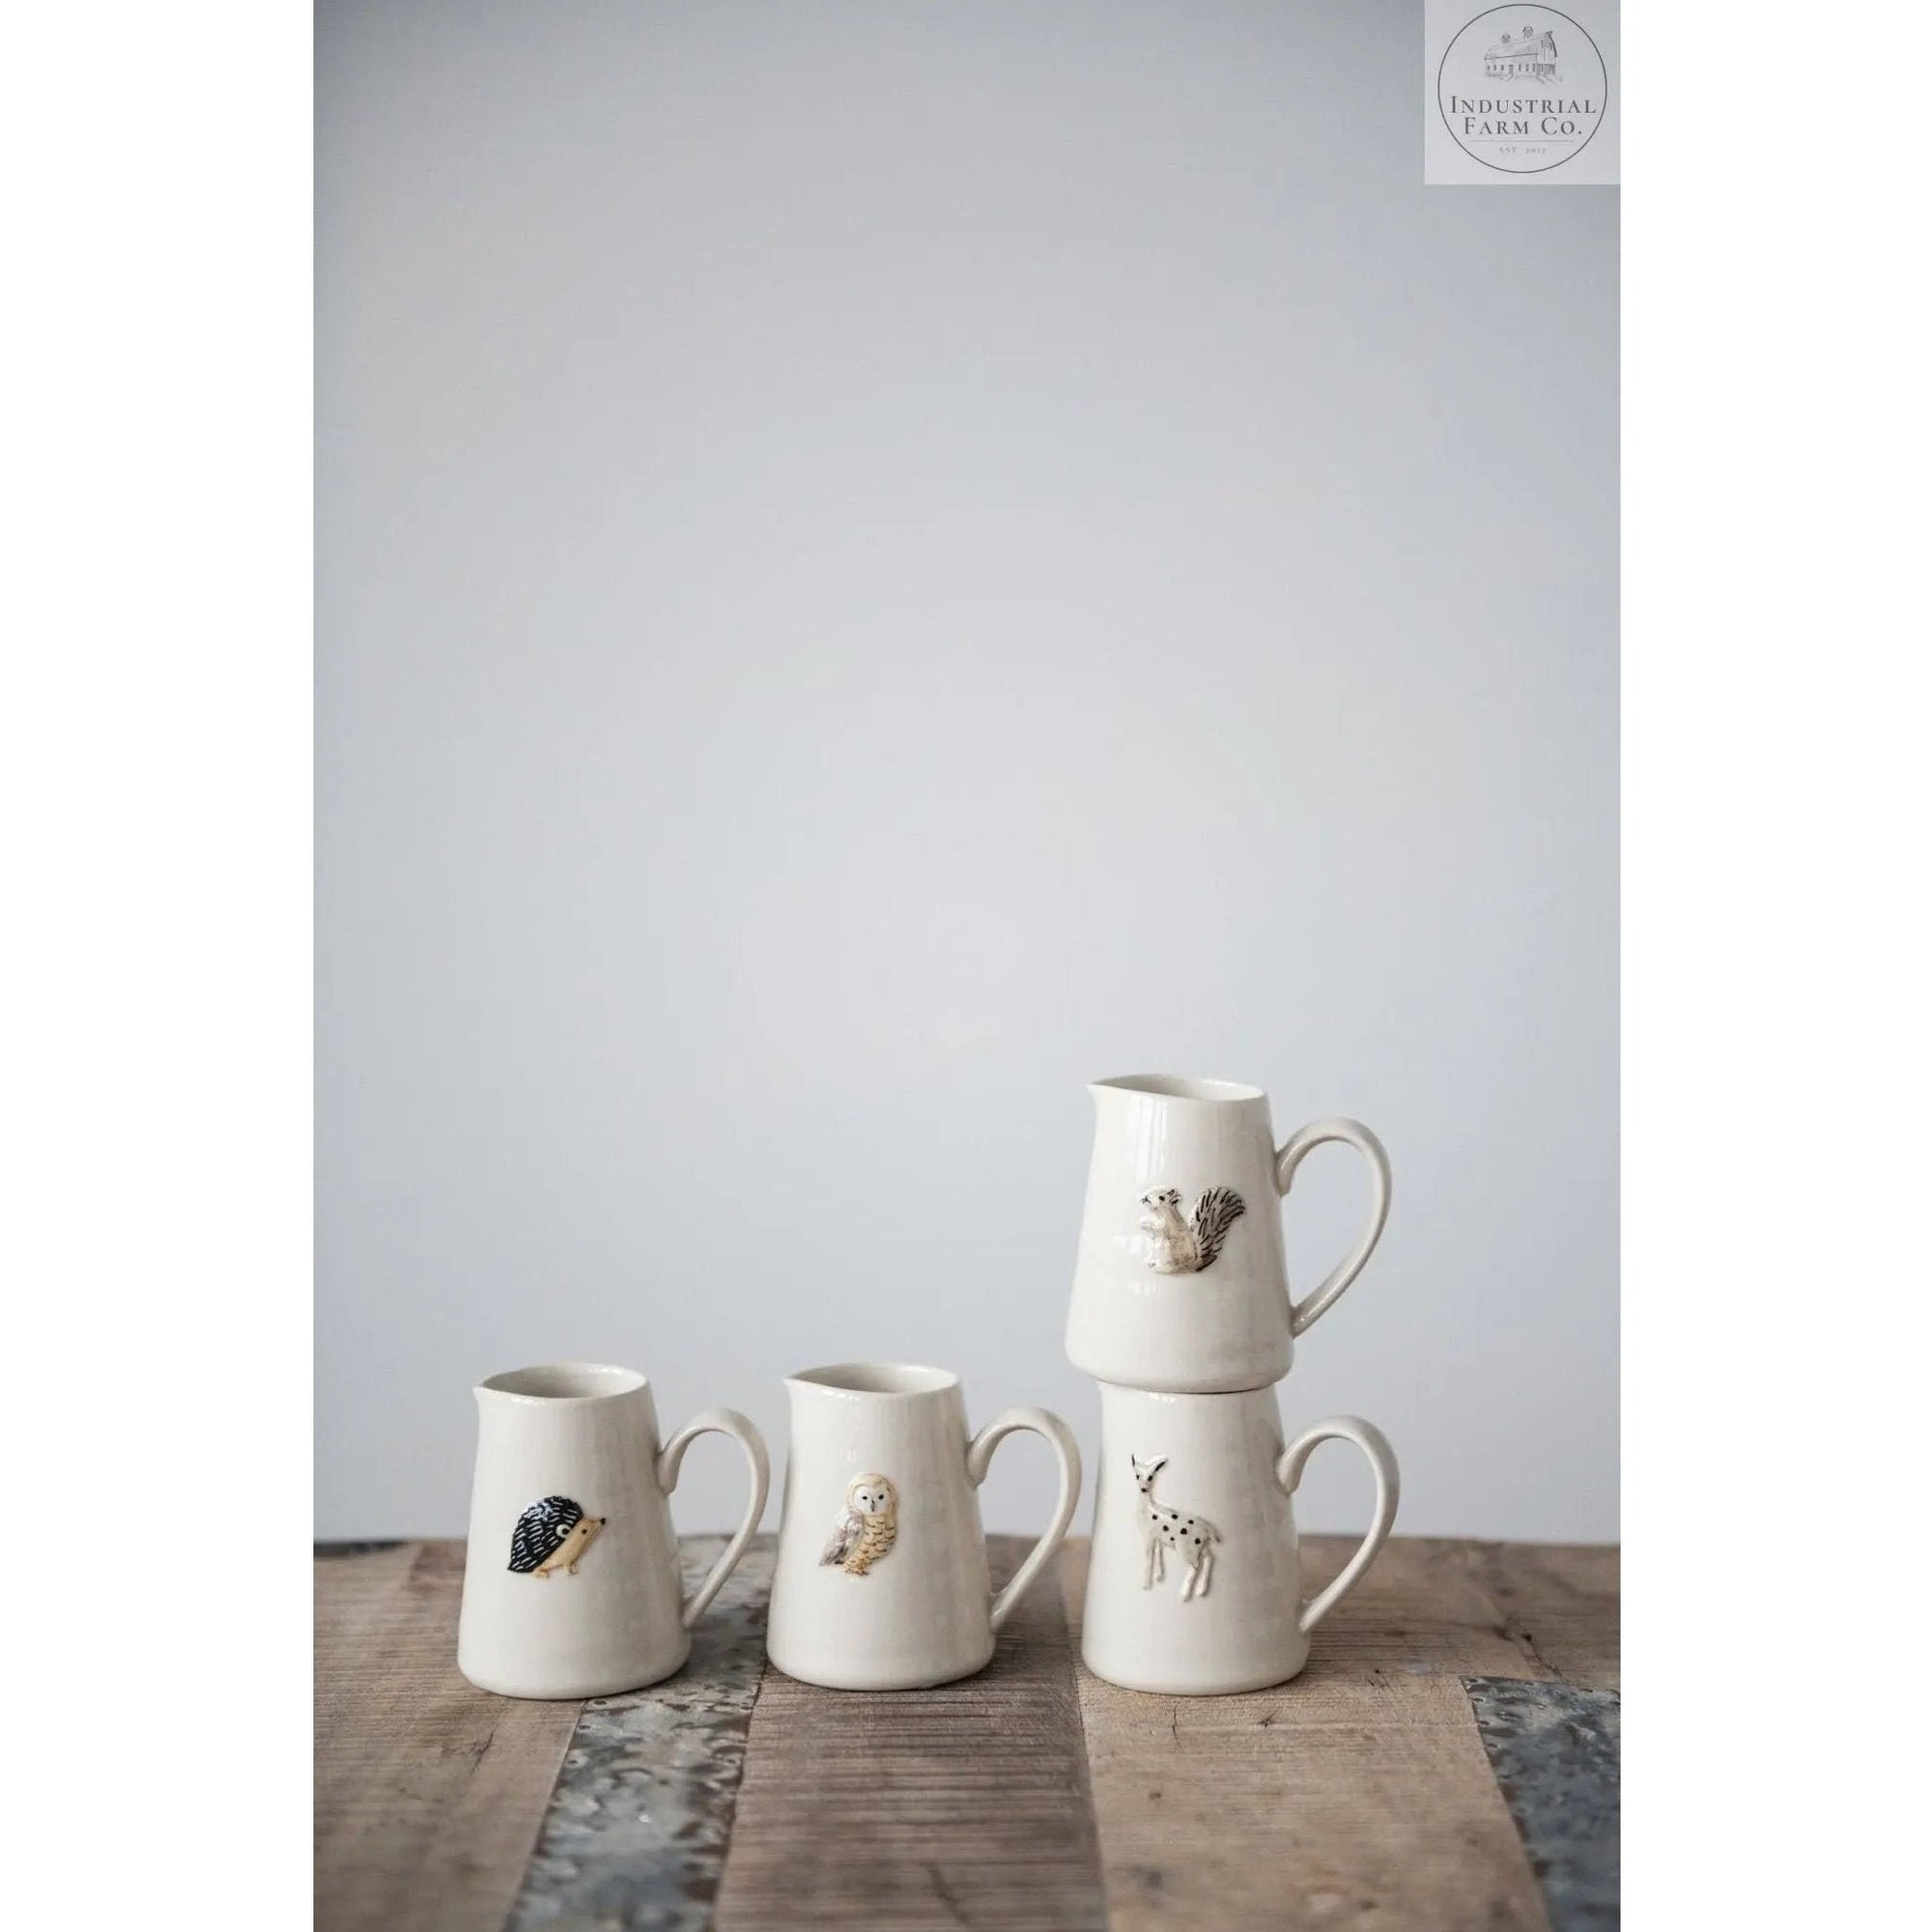 In The Woods Mini Pitchers  Deer   | Industrial Farm Co